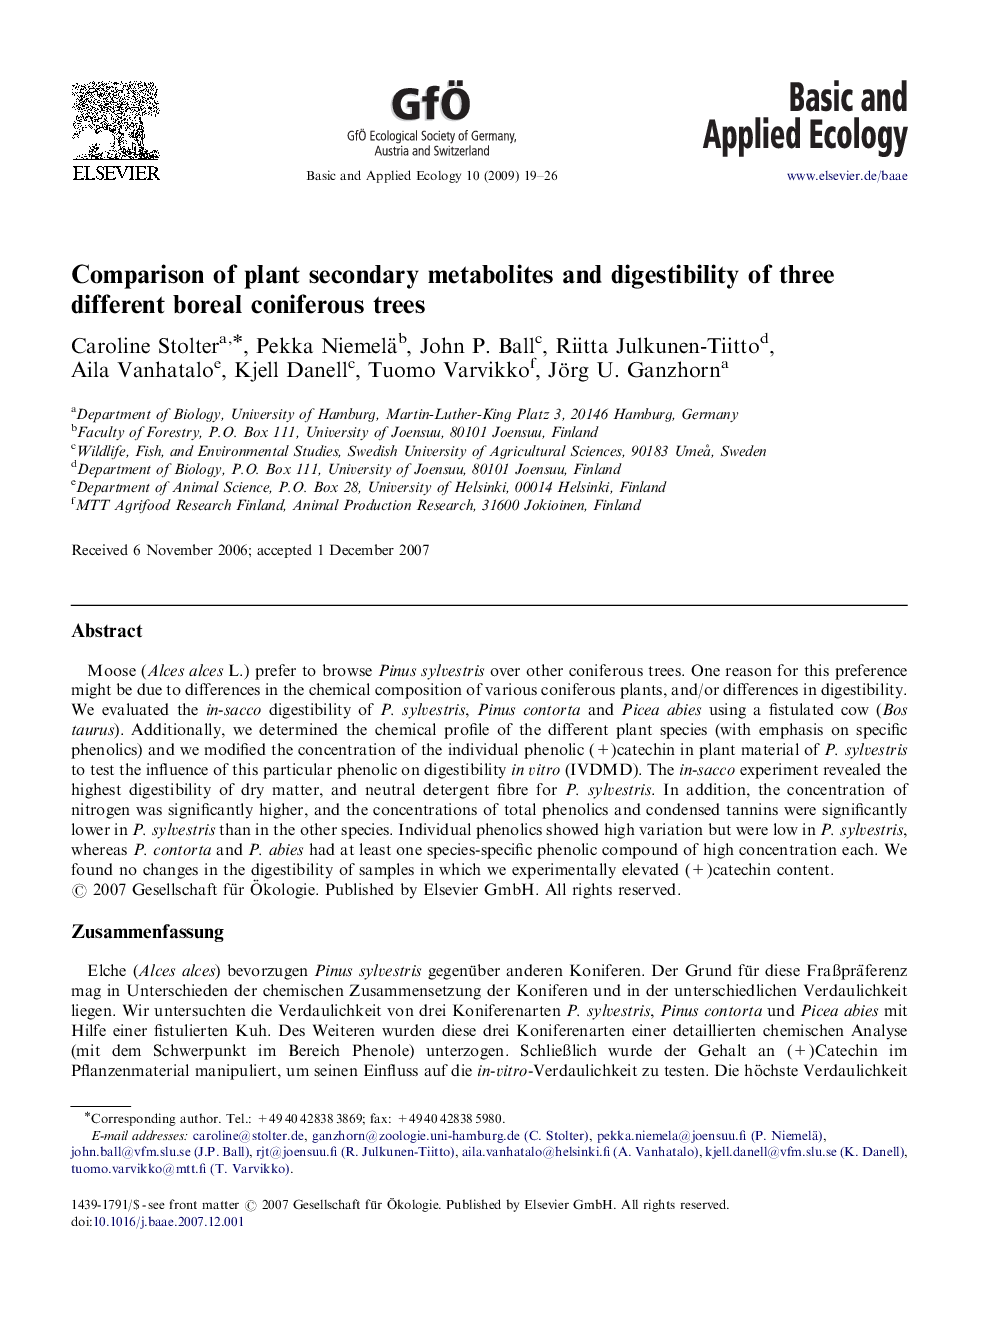 Comparison of plant secondary metabolites and digestibility of three different boreal coniferous trees